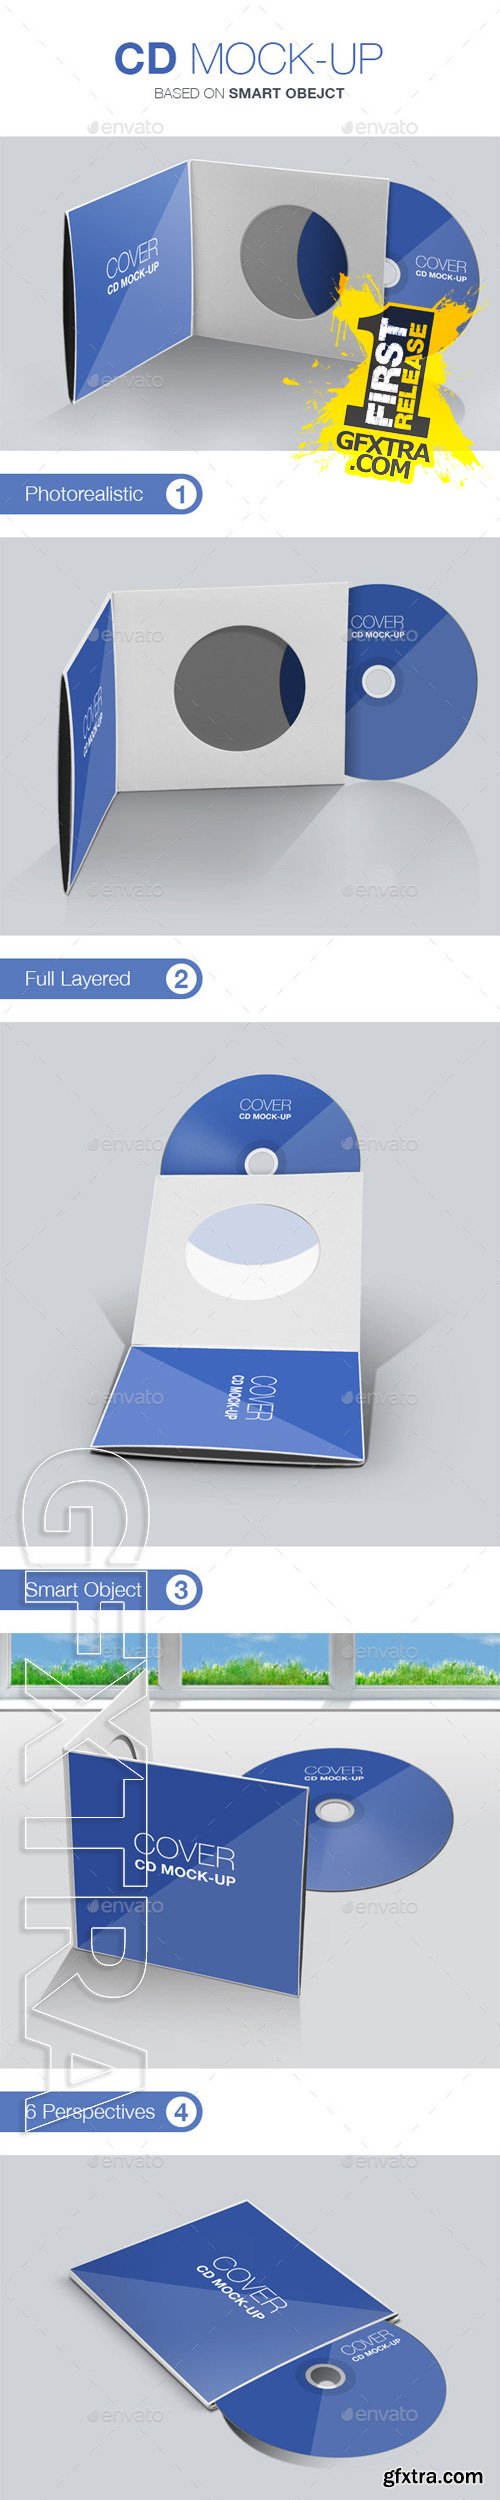 Graphicriver - CD Mock-up 10578822